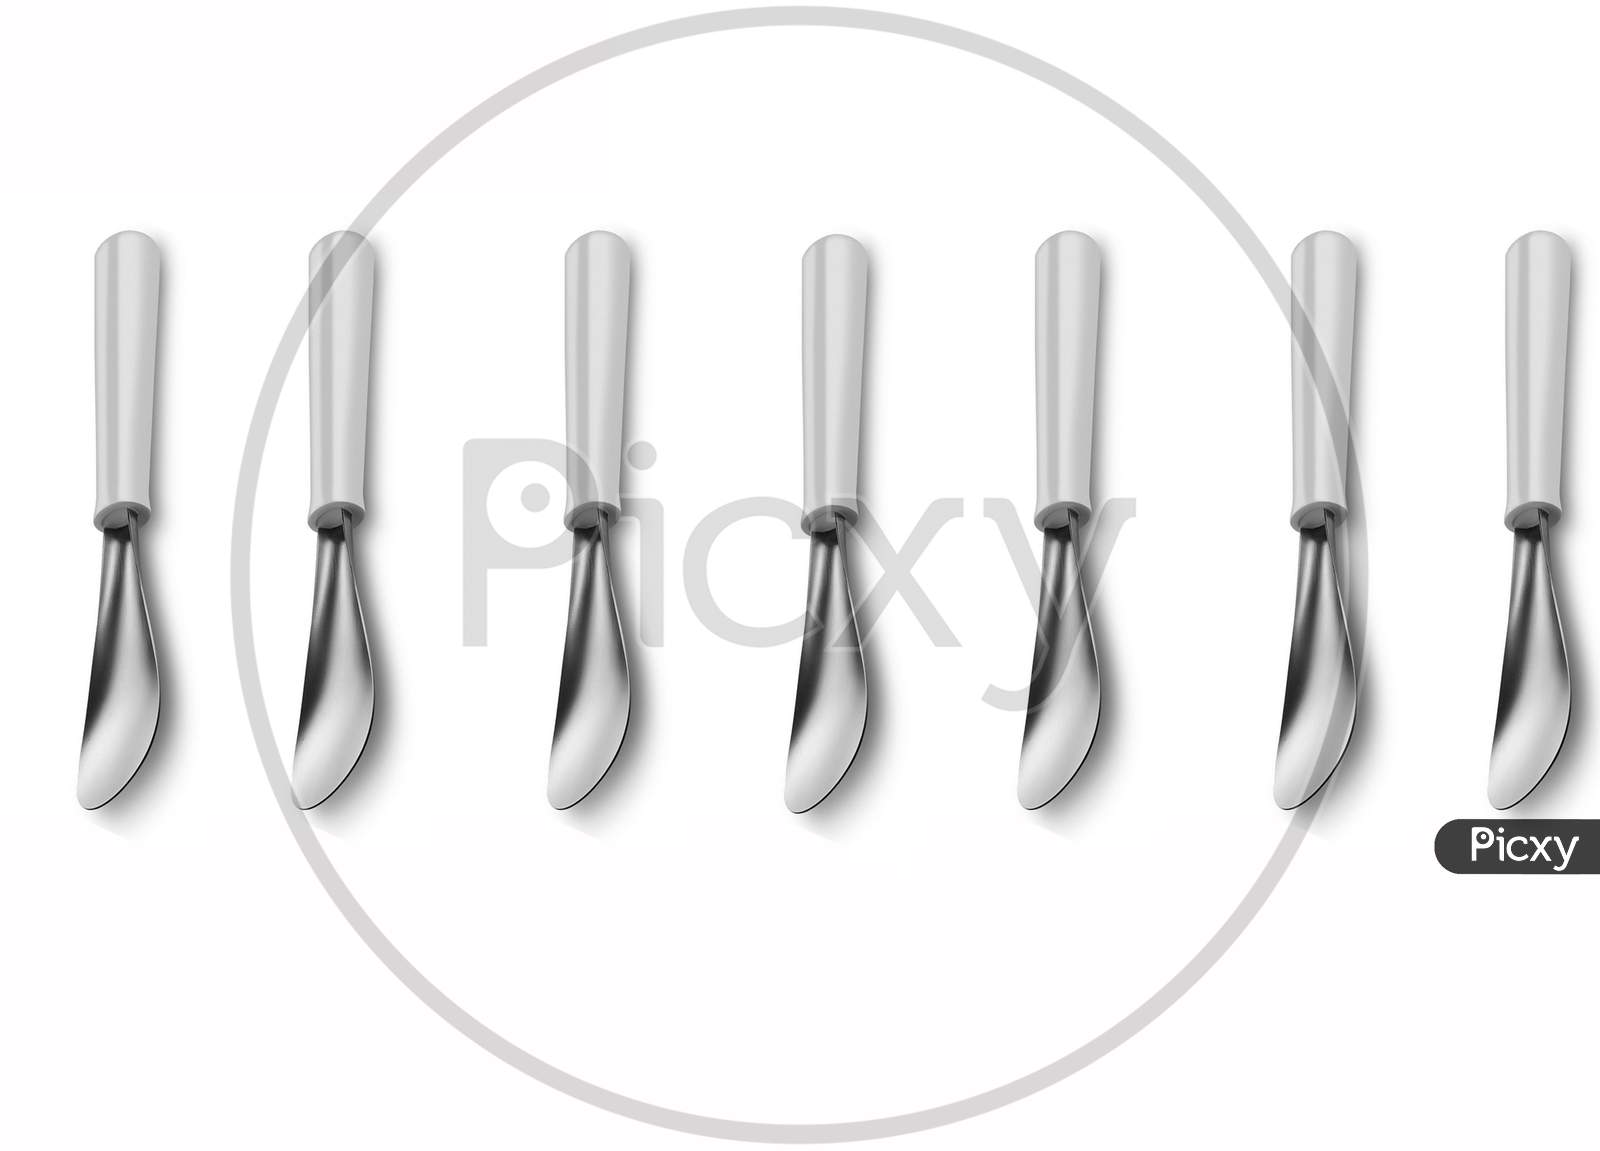 Seven Vertically Kept Silver Metal Cooking Spatula Isolated On A White Background